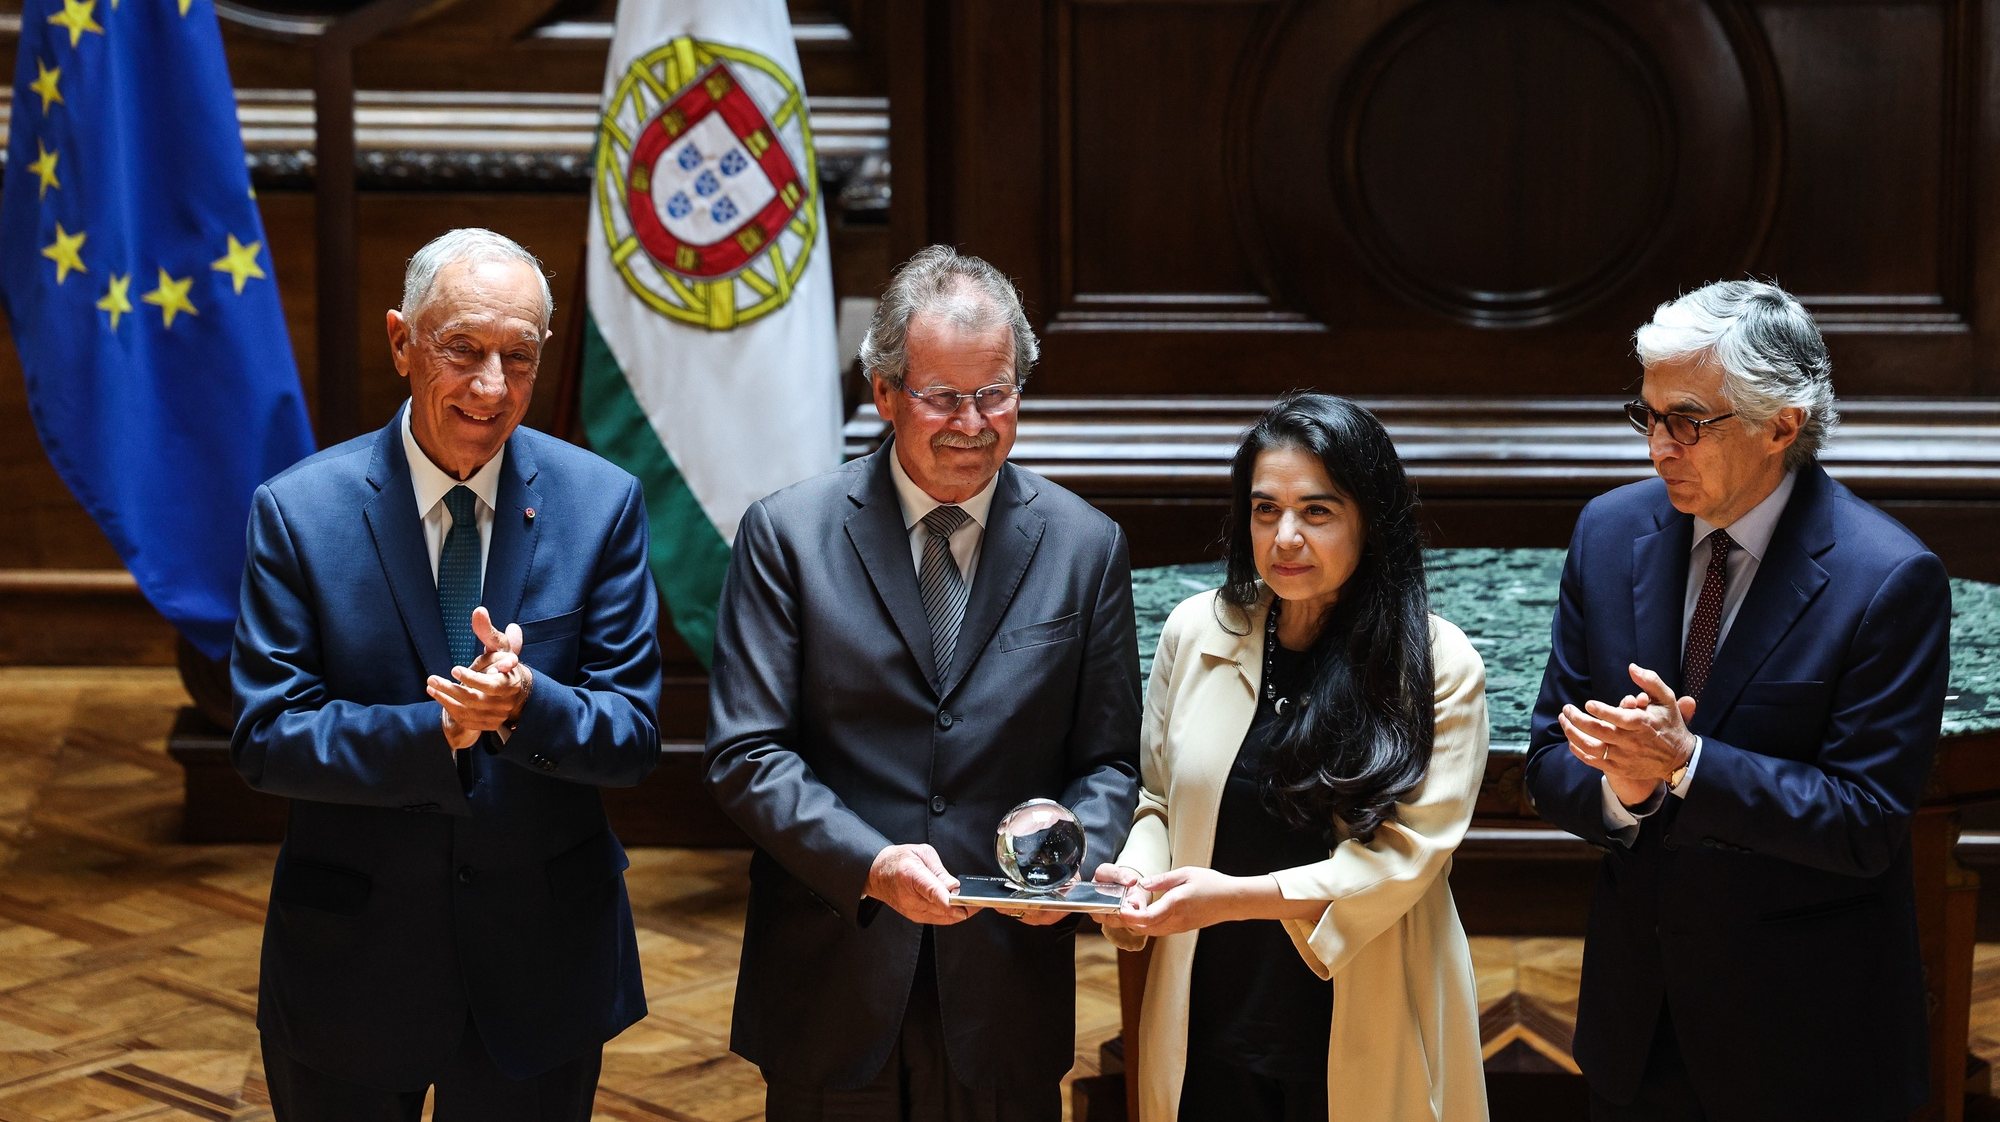 Portuguese President Marcelo Rebelo de Sousa (L) and the President of the Assembly Jose Pedro Aguiar Branco (R) applaud the awarding of Global Campus of Human Rights President Veronica Gomez (2-R) and General-Secretary Manfred Nowak (2-L) with the North/South prize during the ceremony held at the Portuguese Parliament in Lisbon, Portugal, 21 May 2024. The Council of Europe&#039;s North-South Prize annually distinguishes two personalities or organizations for their commitment to Human Rights, Democracy, and Rule of Law, and for their contribution to North-South dialogue and encouragement of solidarity, interdependence, and partnerships. TIAGO PETINGA/LUSA